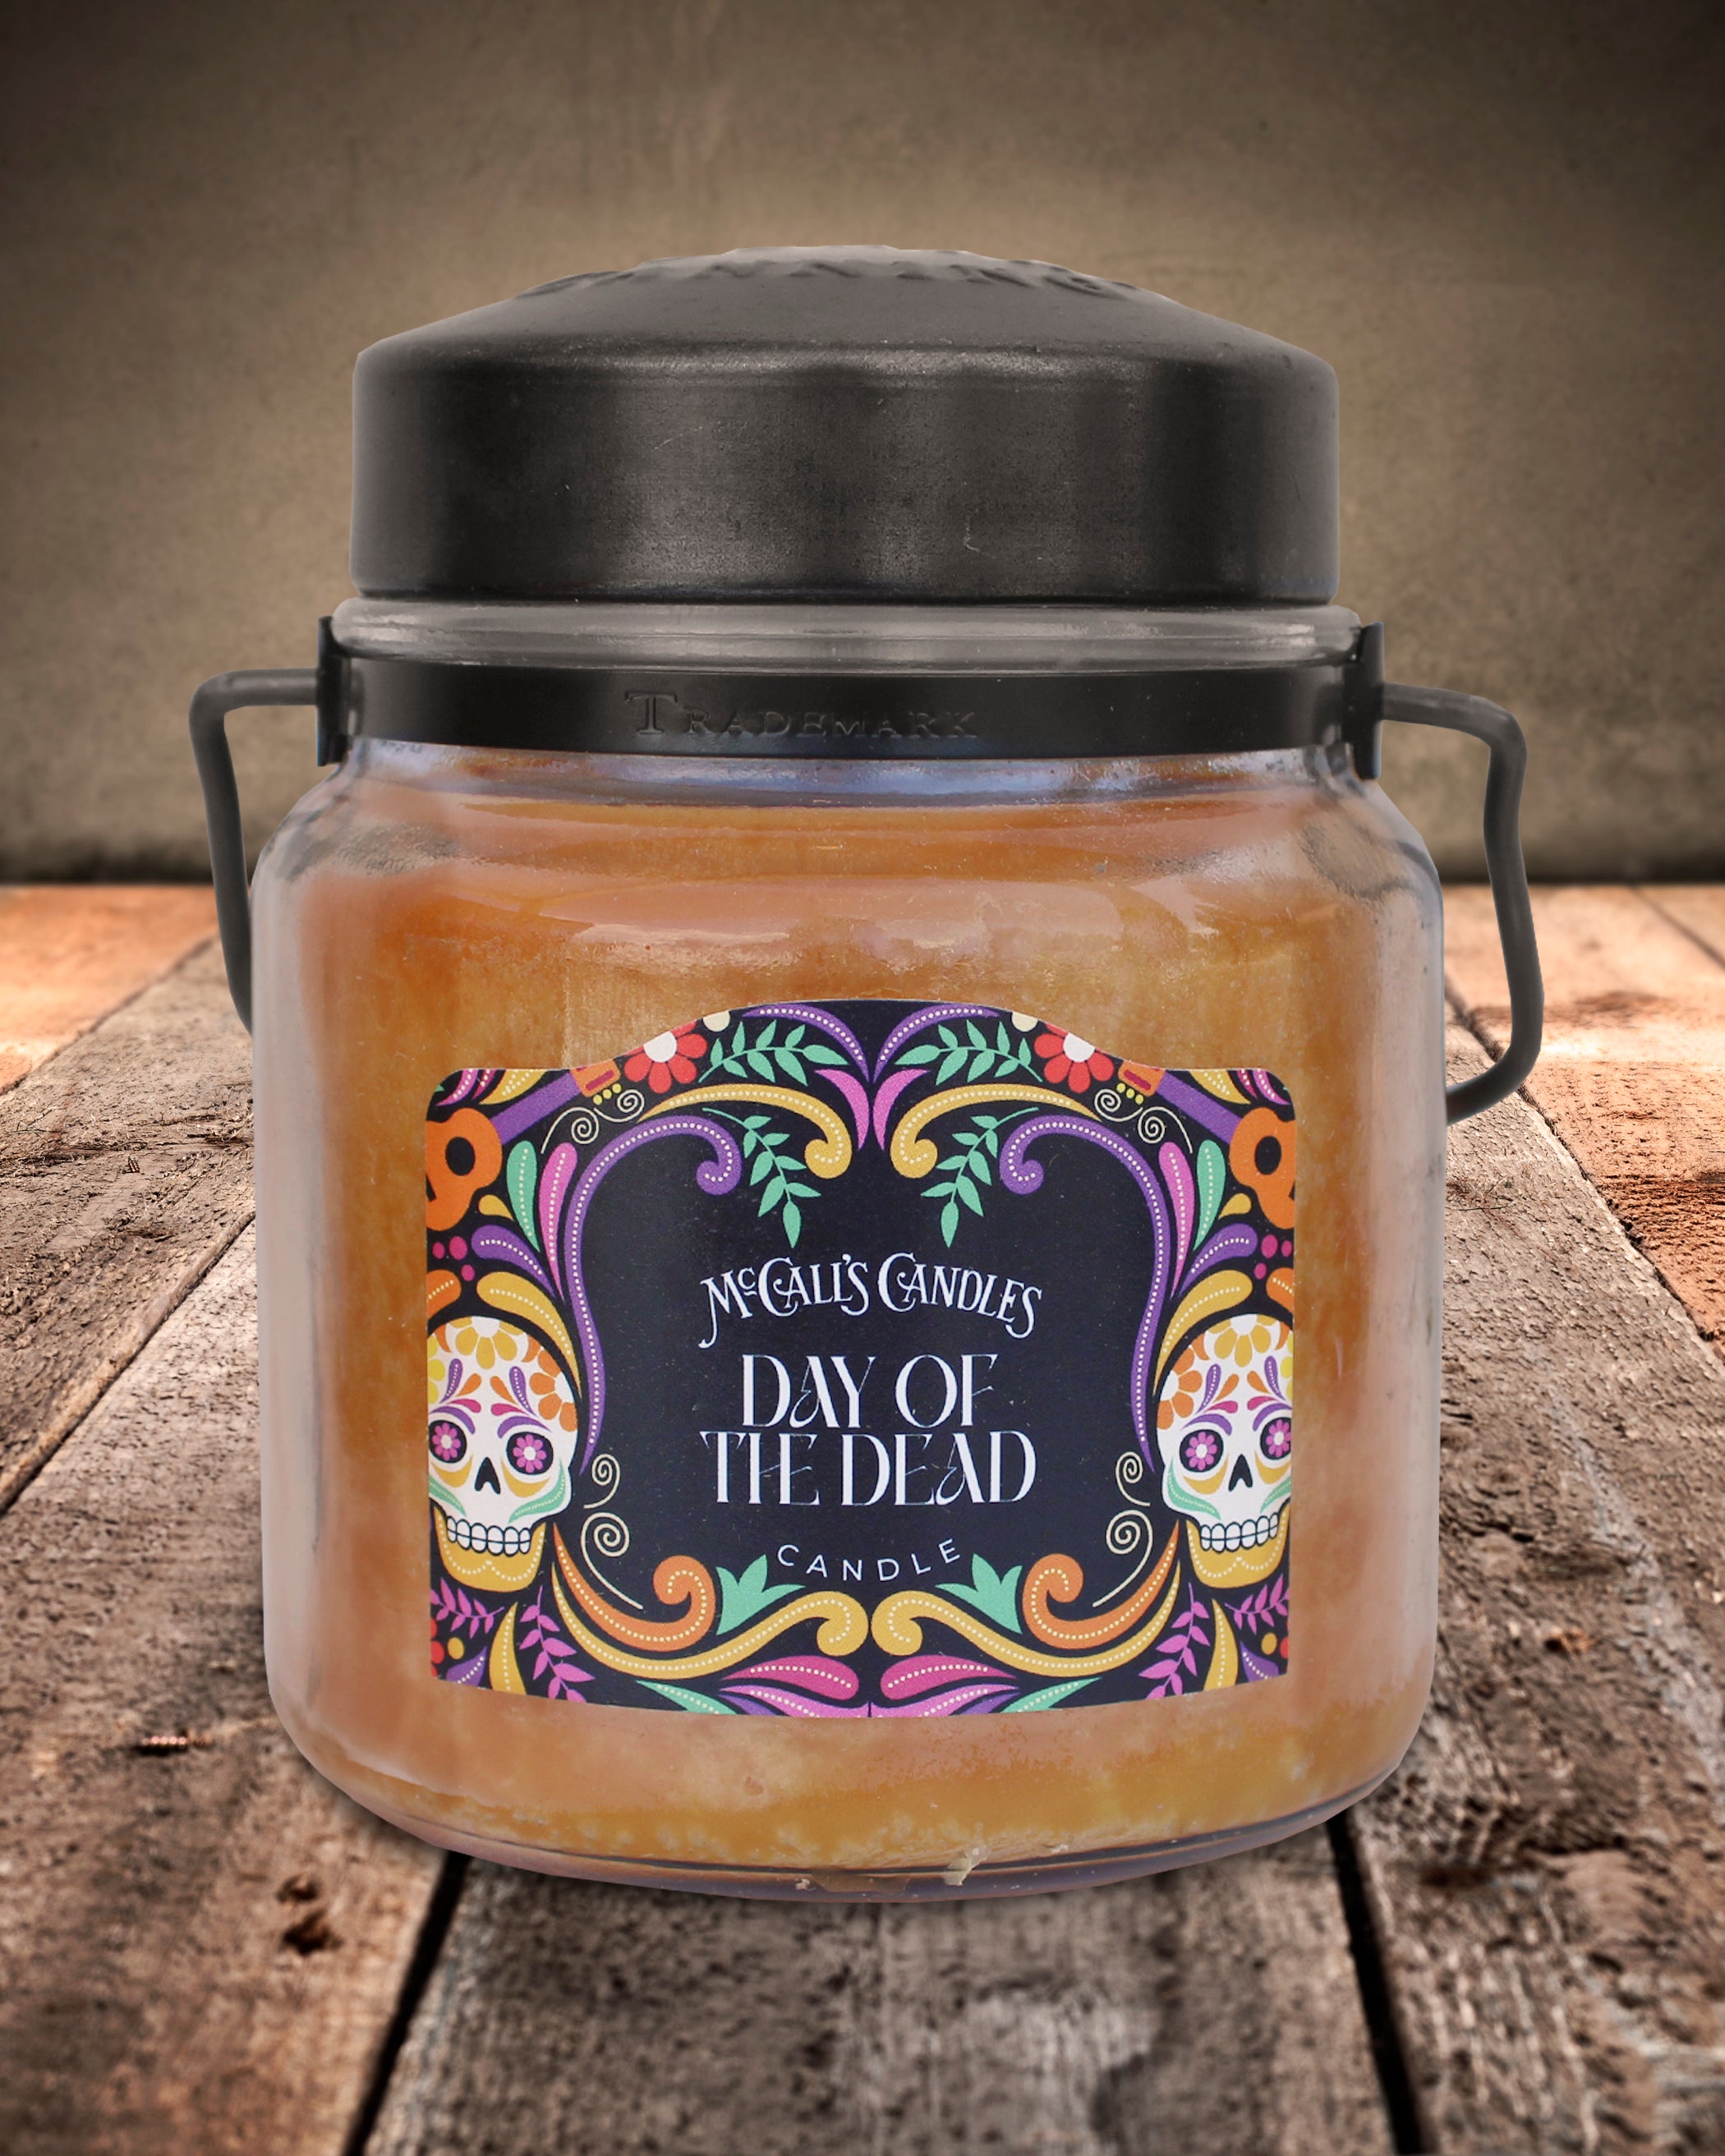 McCalls Candles - Cotton Candy Classic Jar Candle  - Murdoch's